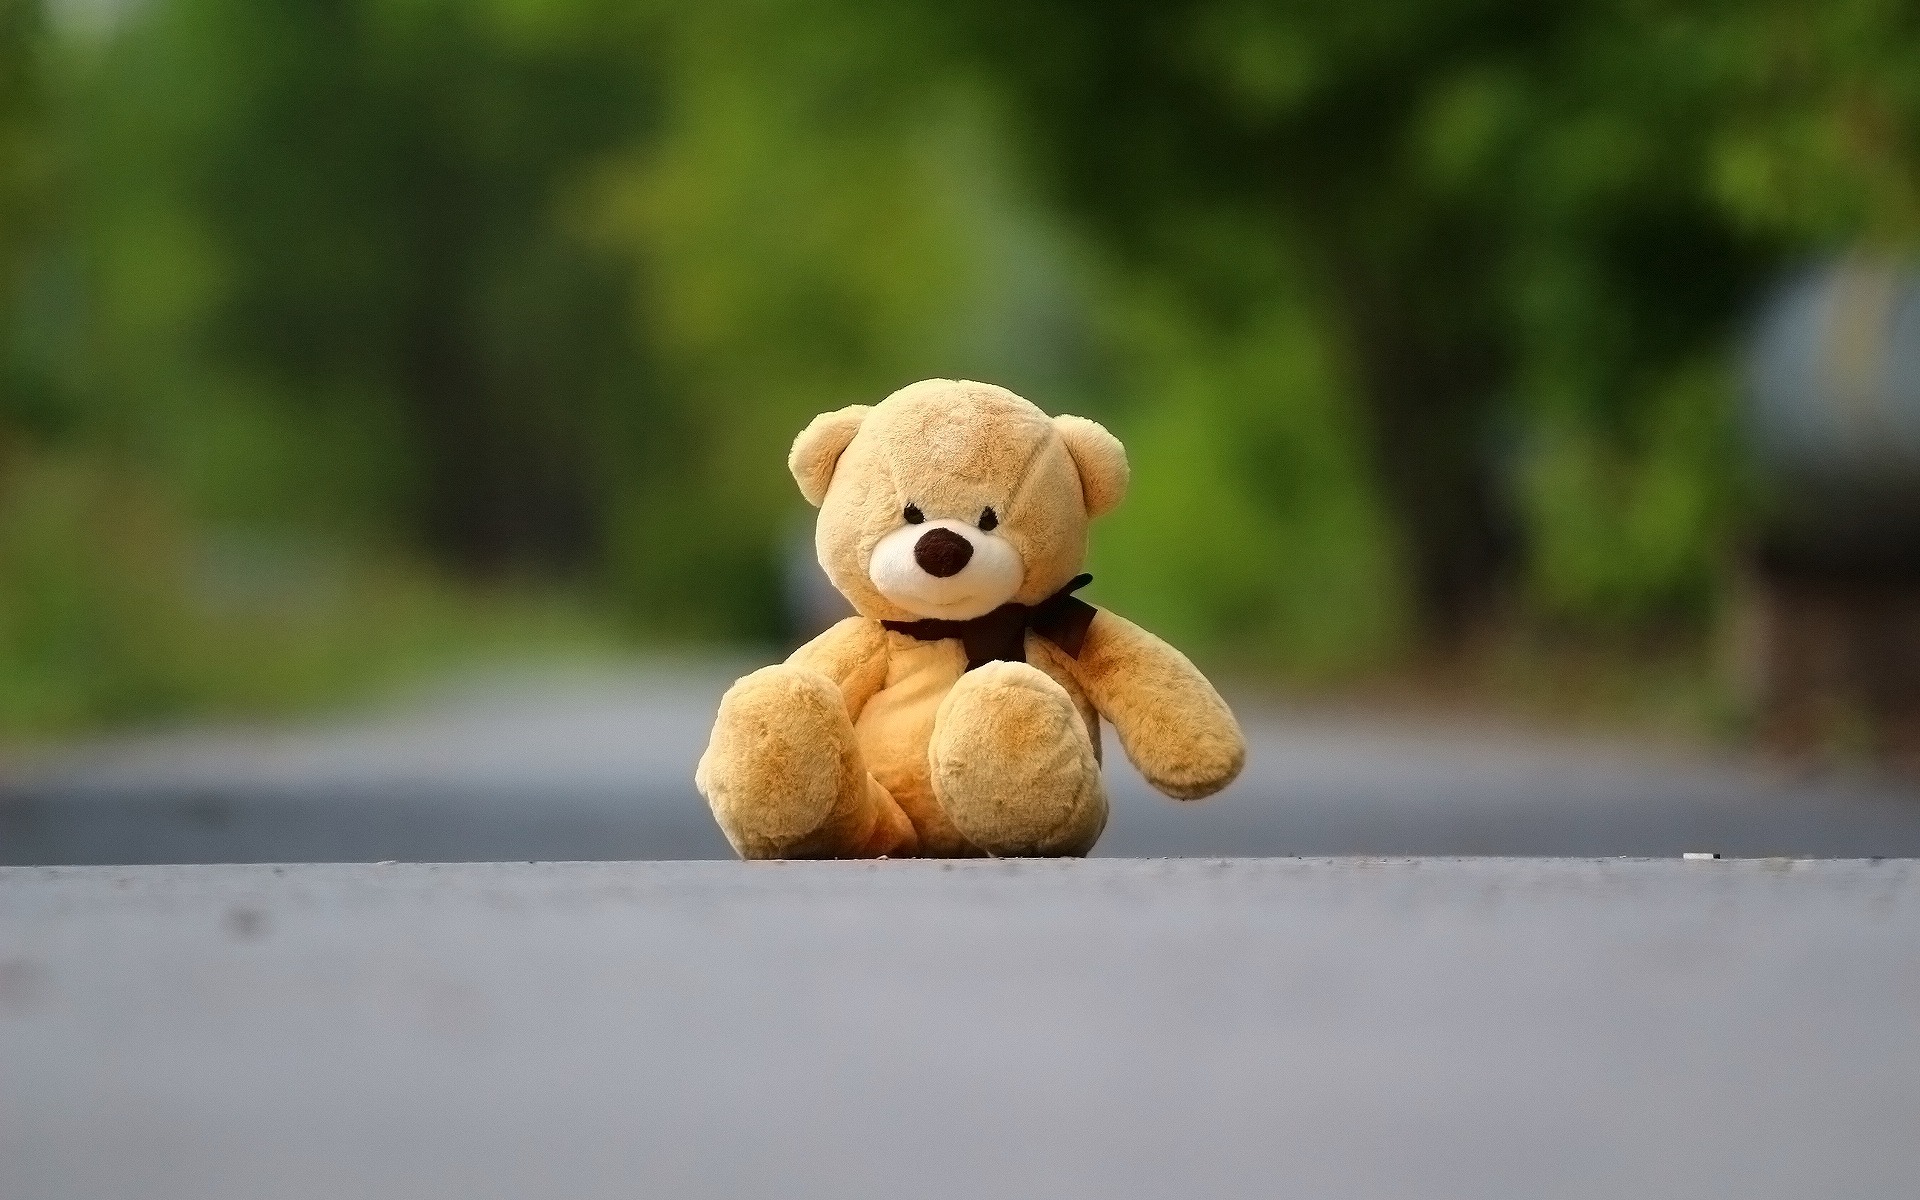 Download wallpaper Teddy bear, road, cute toys, orange bear for desktop with resolution 1920x1200. High Quality HD picture wallpaper